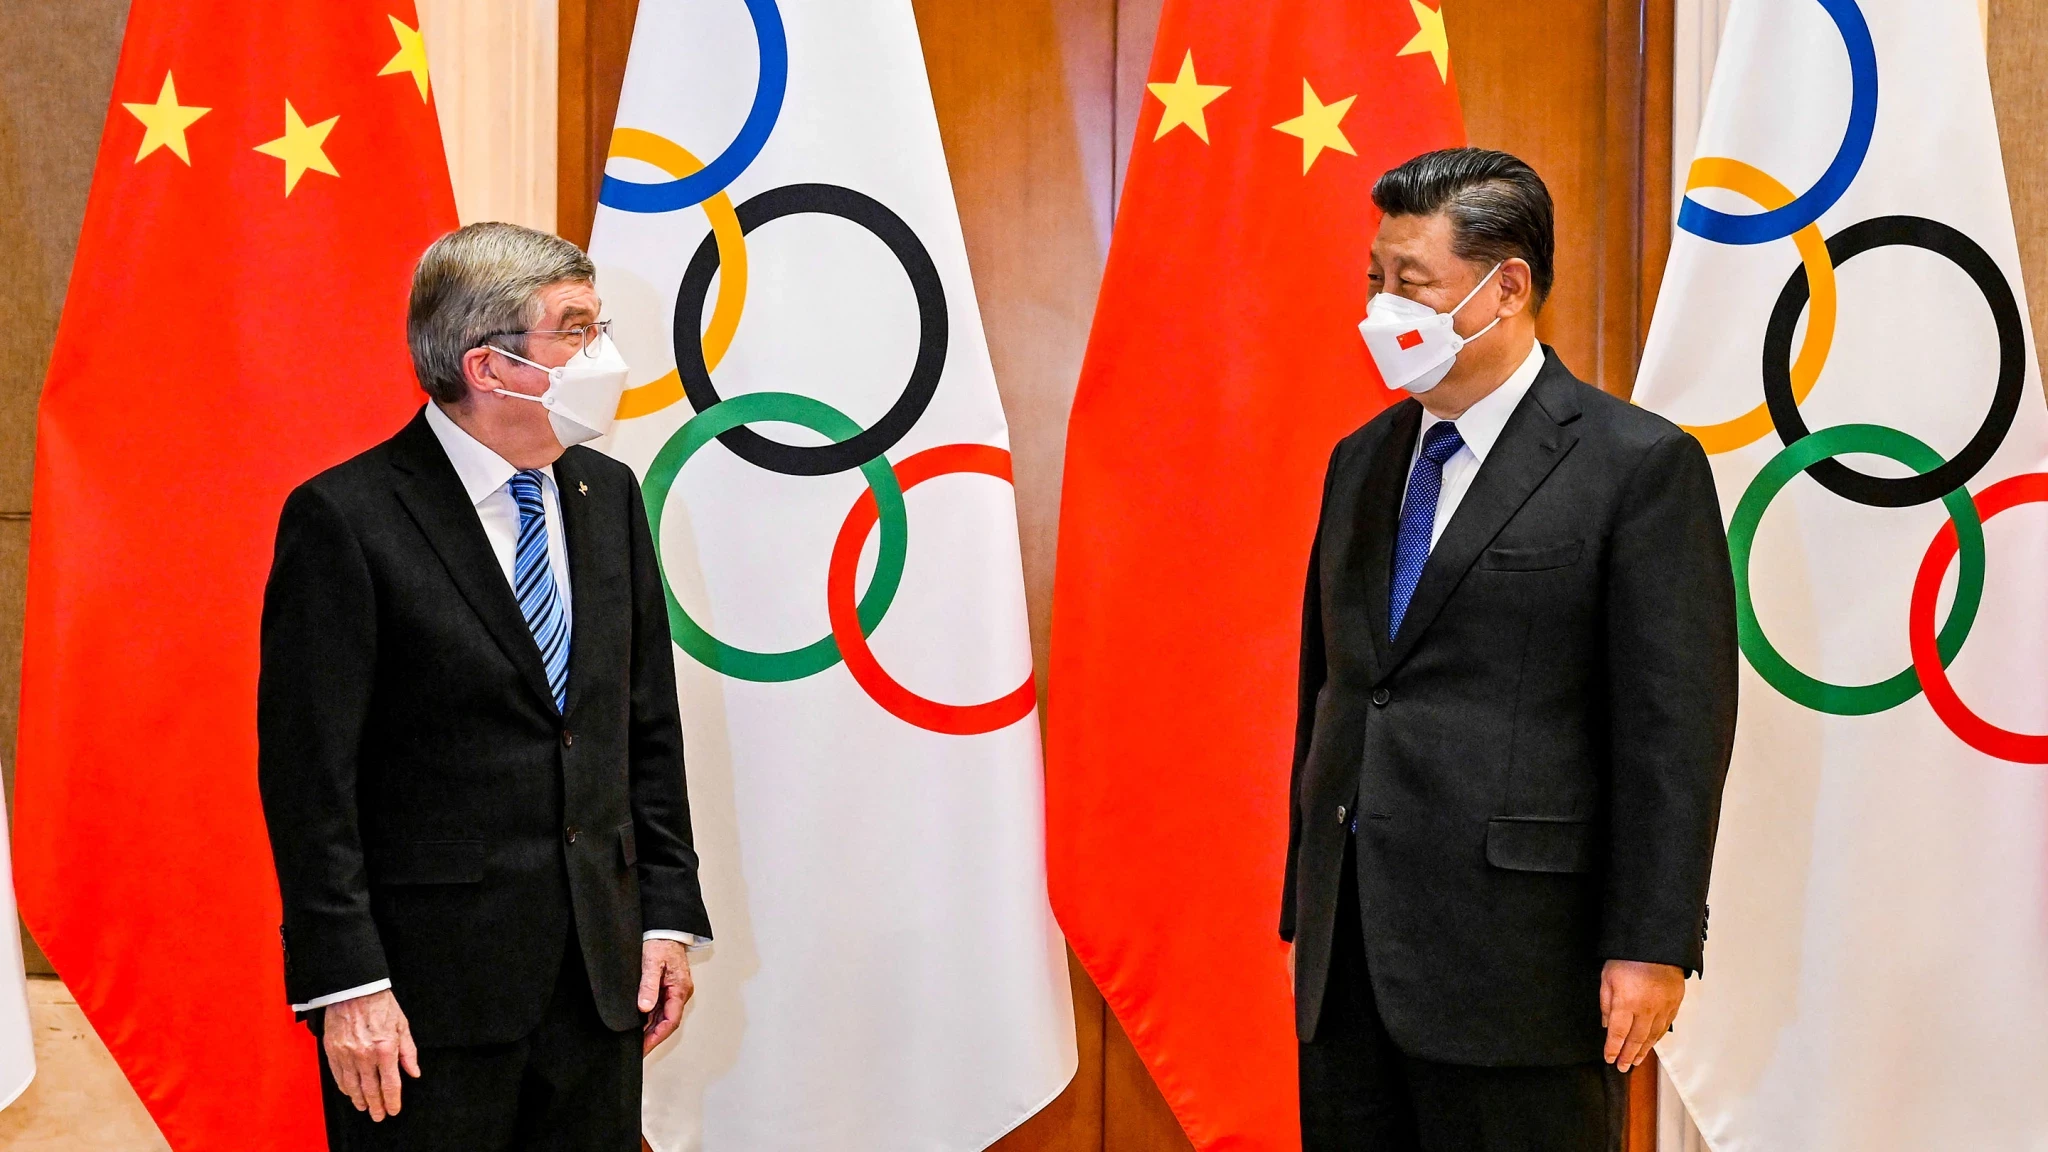 IOC President Thomas Bach held talks with Chinese President Xi Jinping ©Ministry of Foreign Affairs